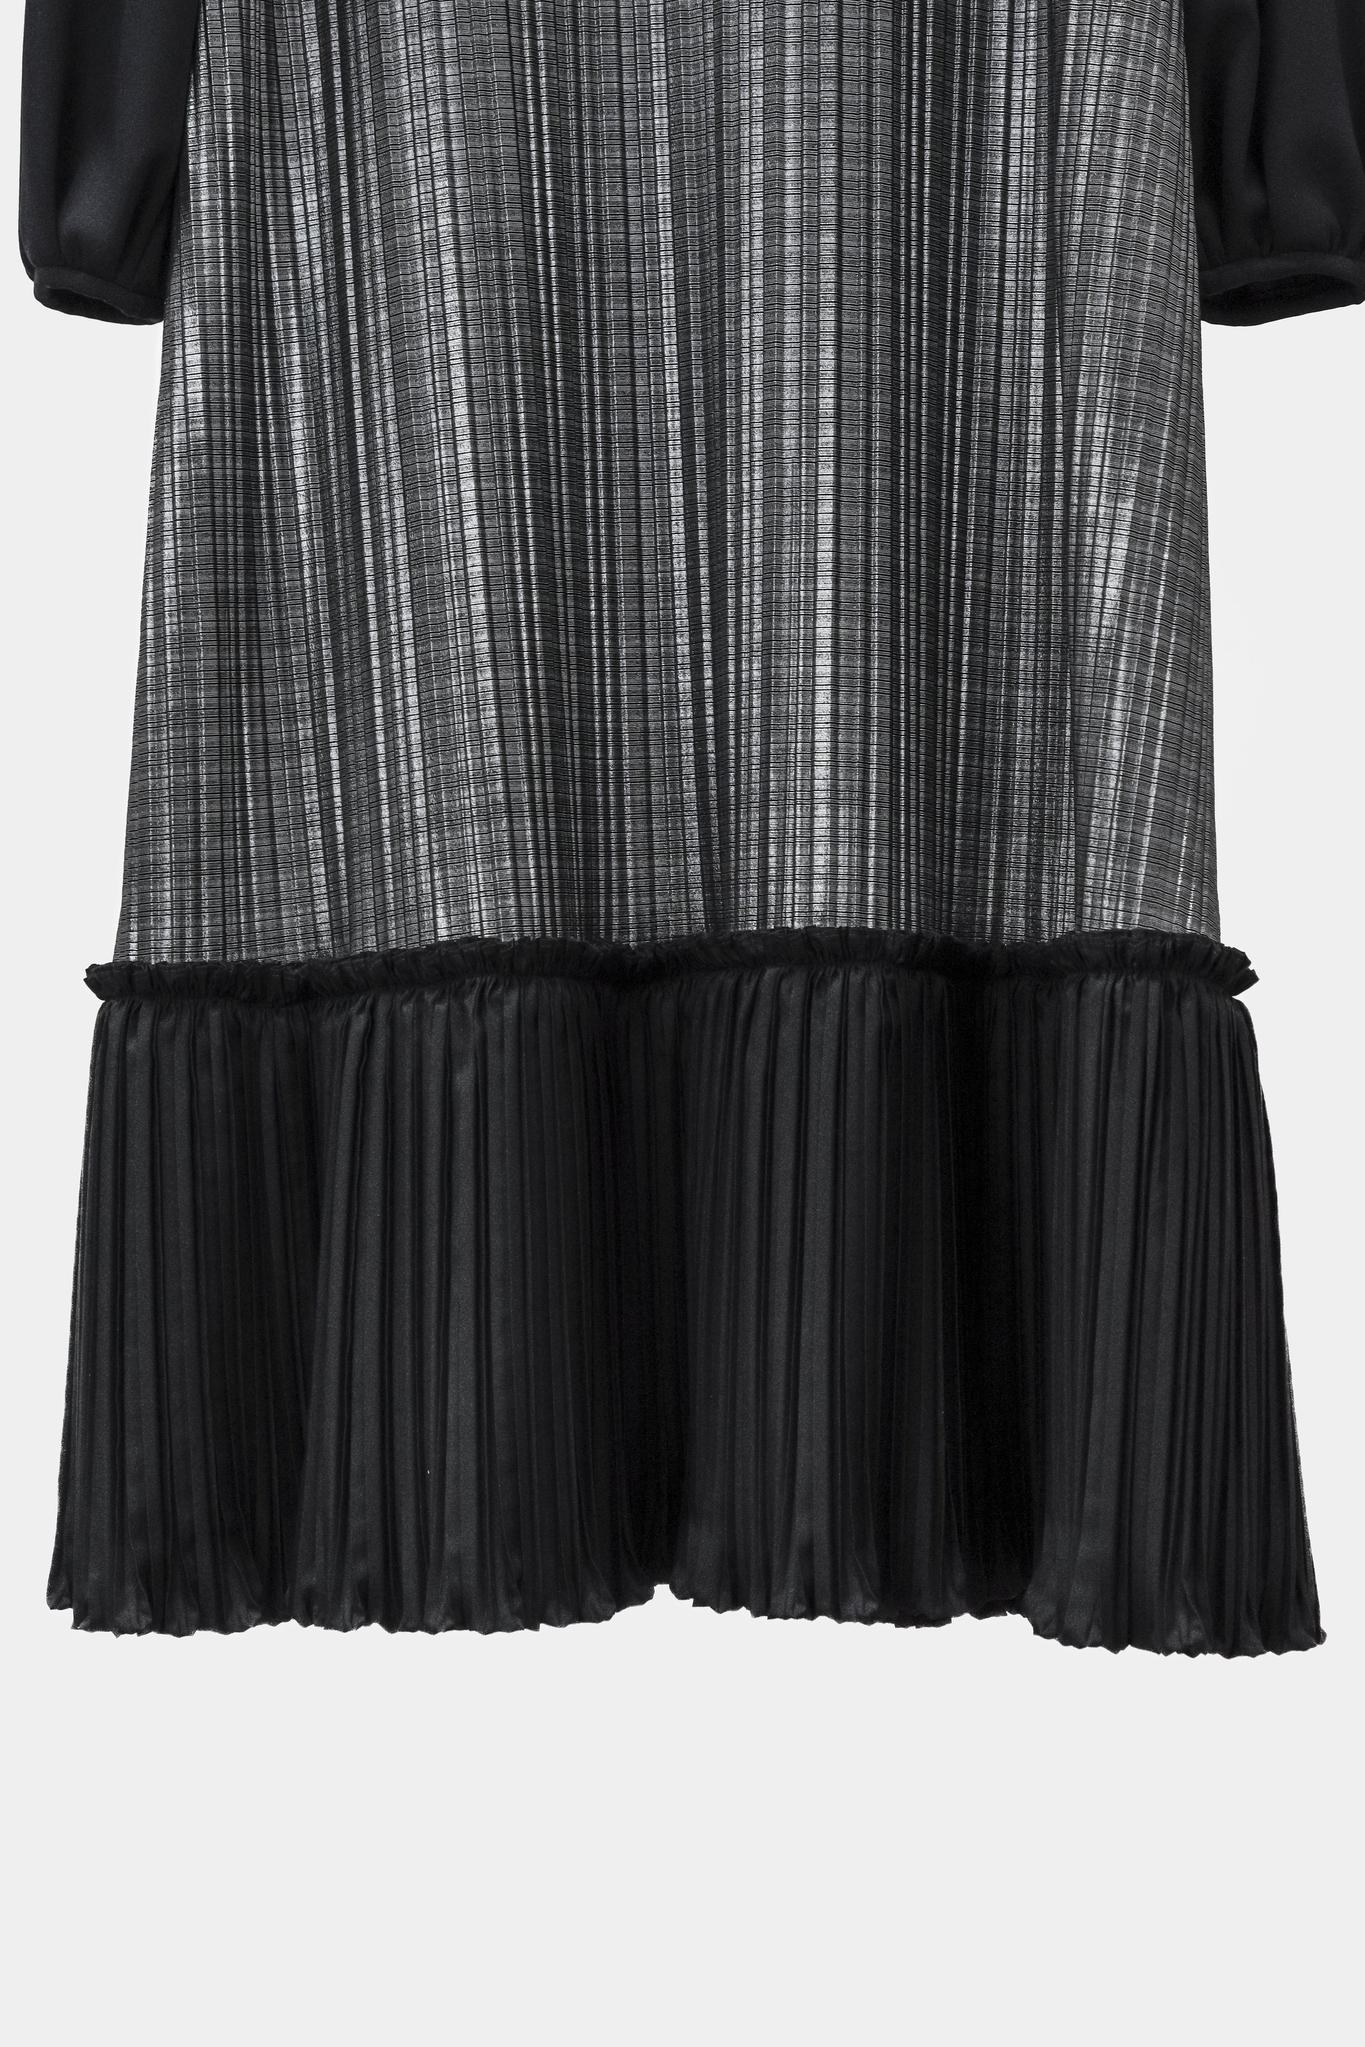 Marie Saint Pierre Black and Silver Pleated Gown